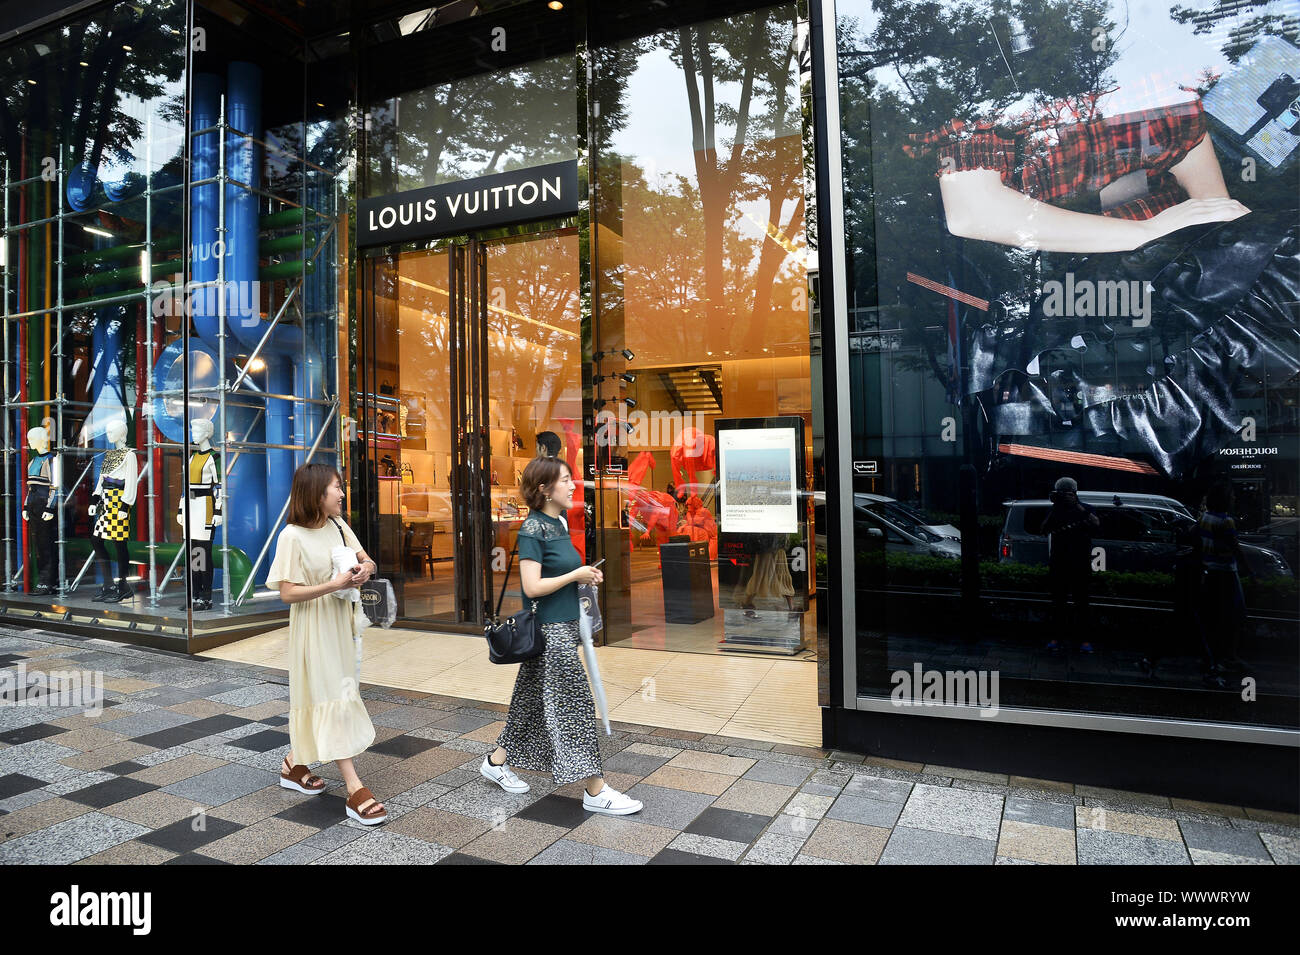 Louis Vutton shop in Melbourne Australia, French fashion house founded in  1854 by Louis Vuitton Stock Photo - Alamy